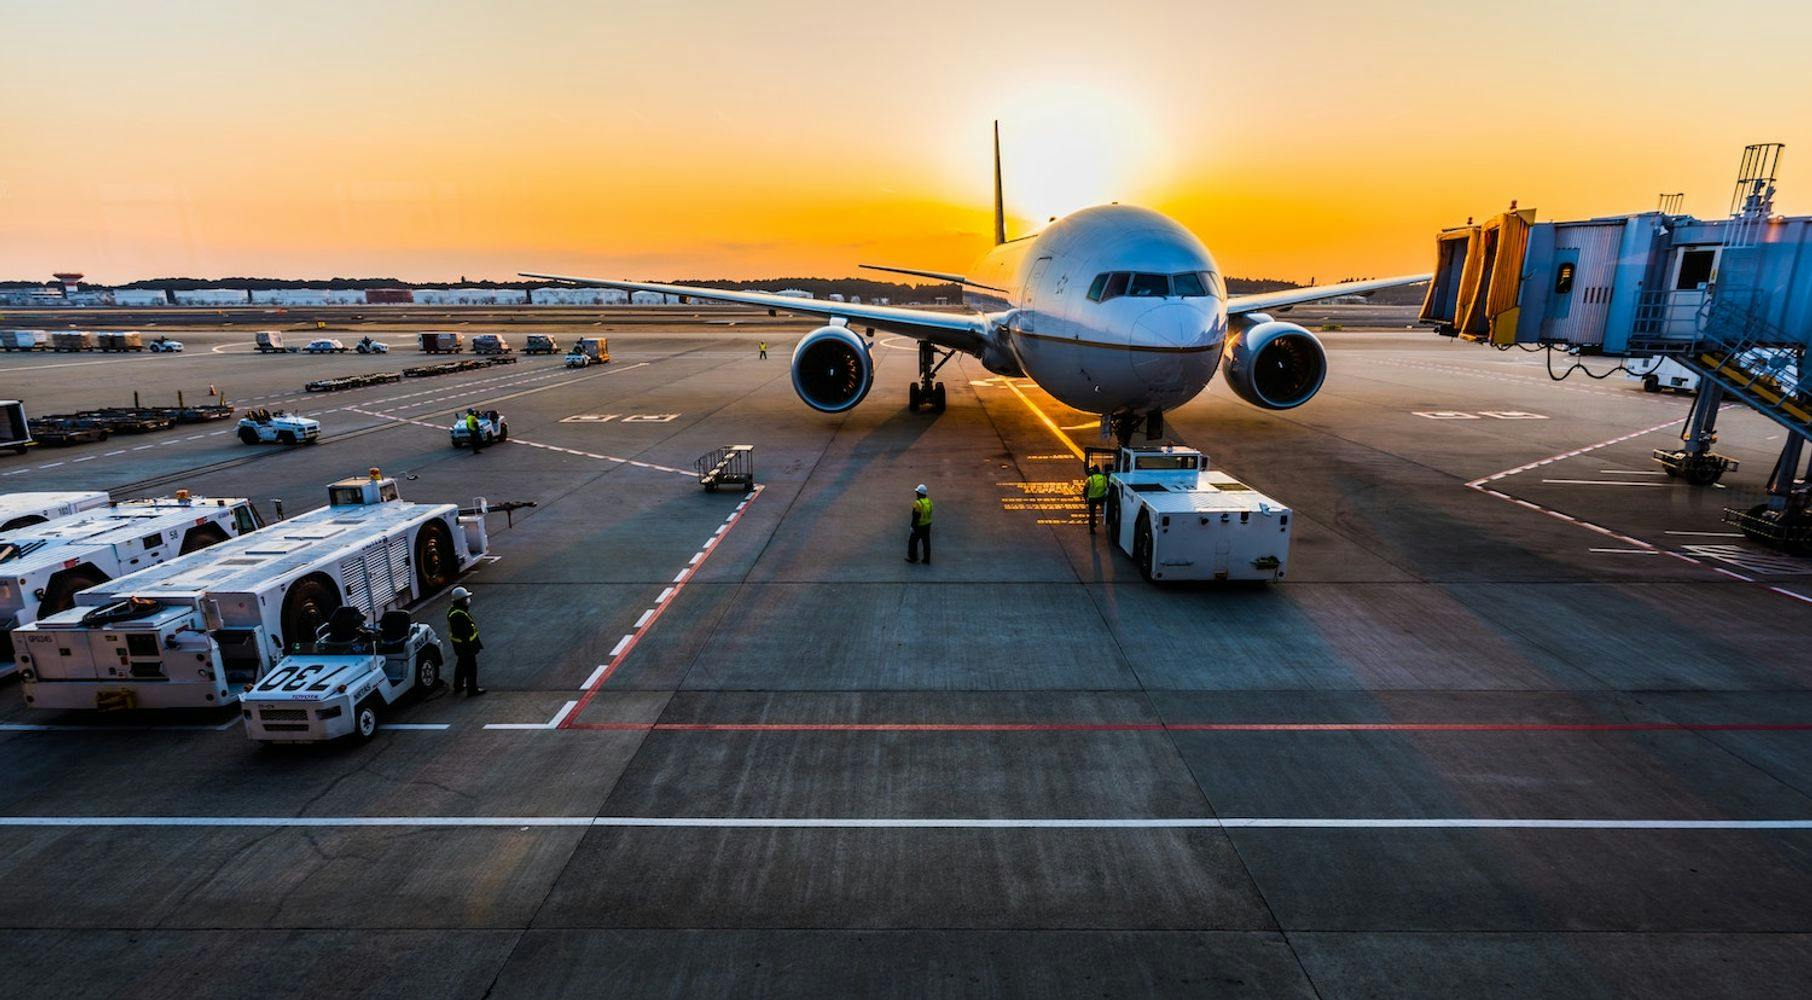 plane at airport with vehicles spaced around at sunset